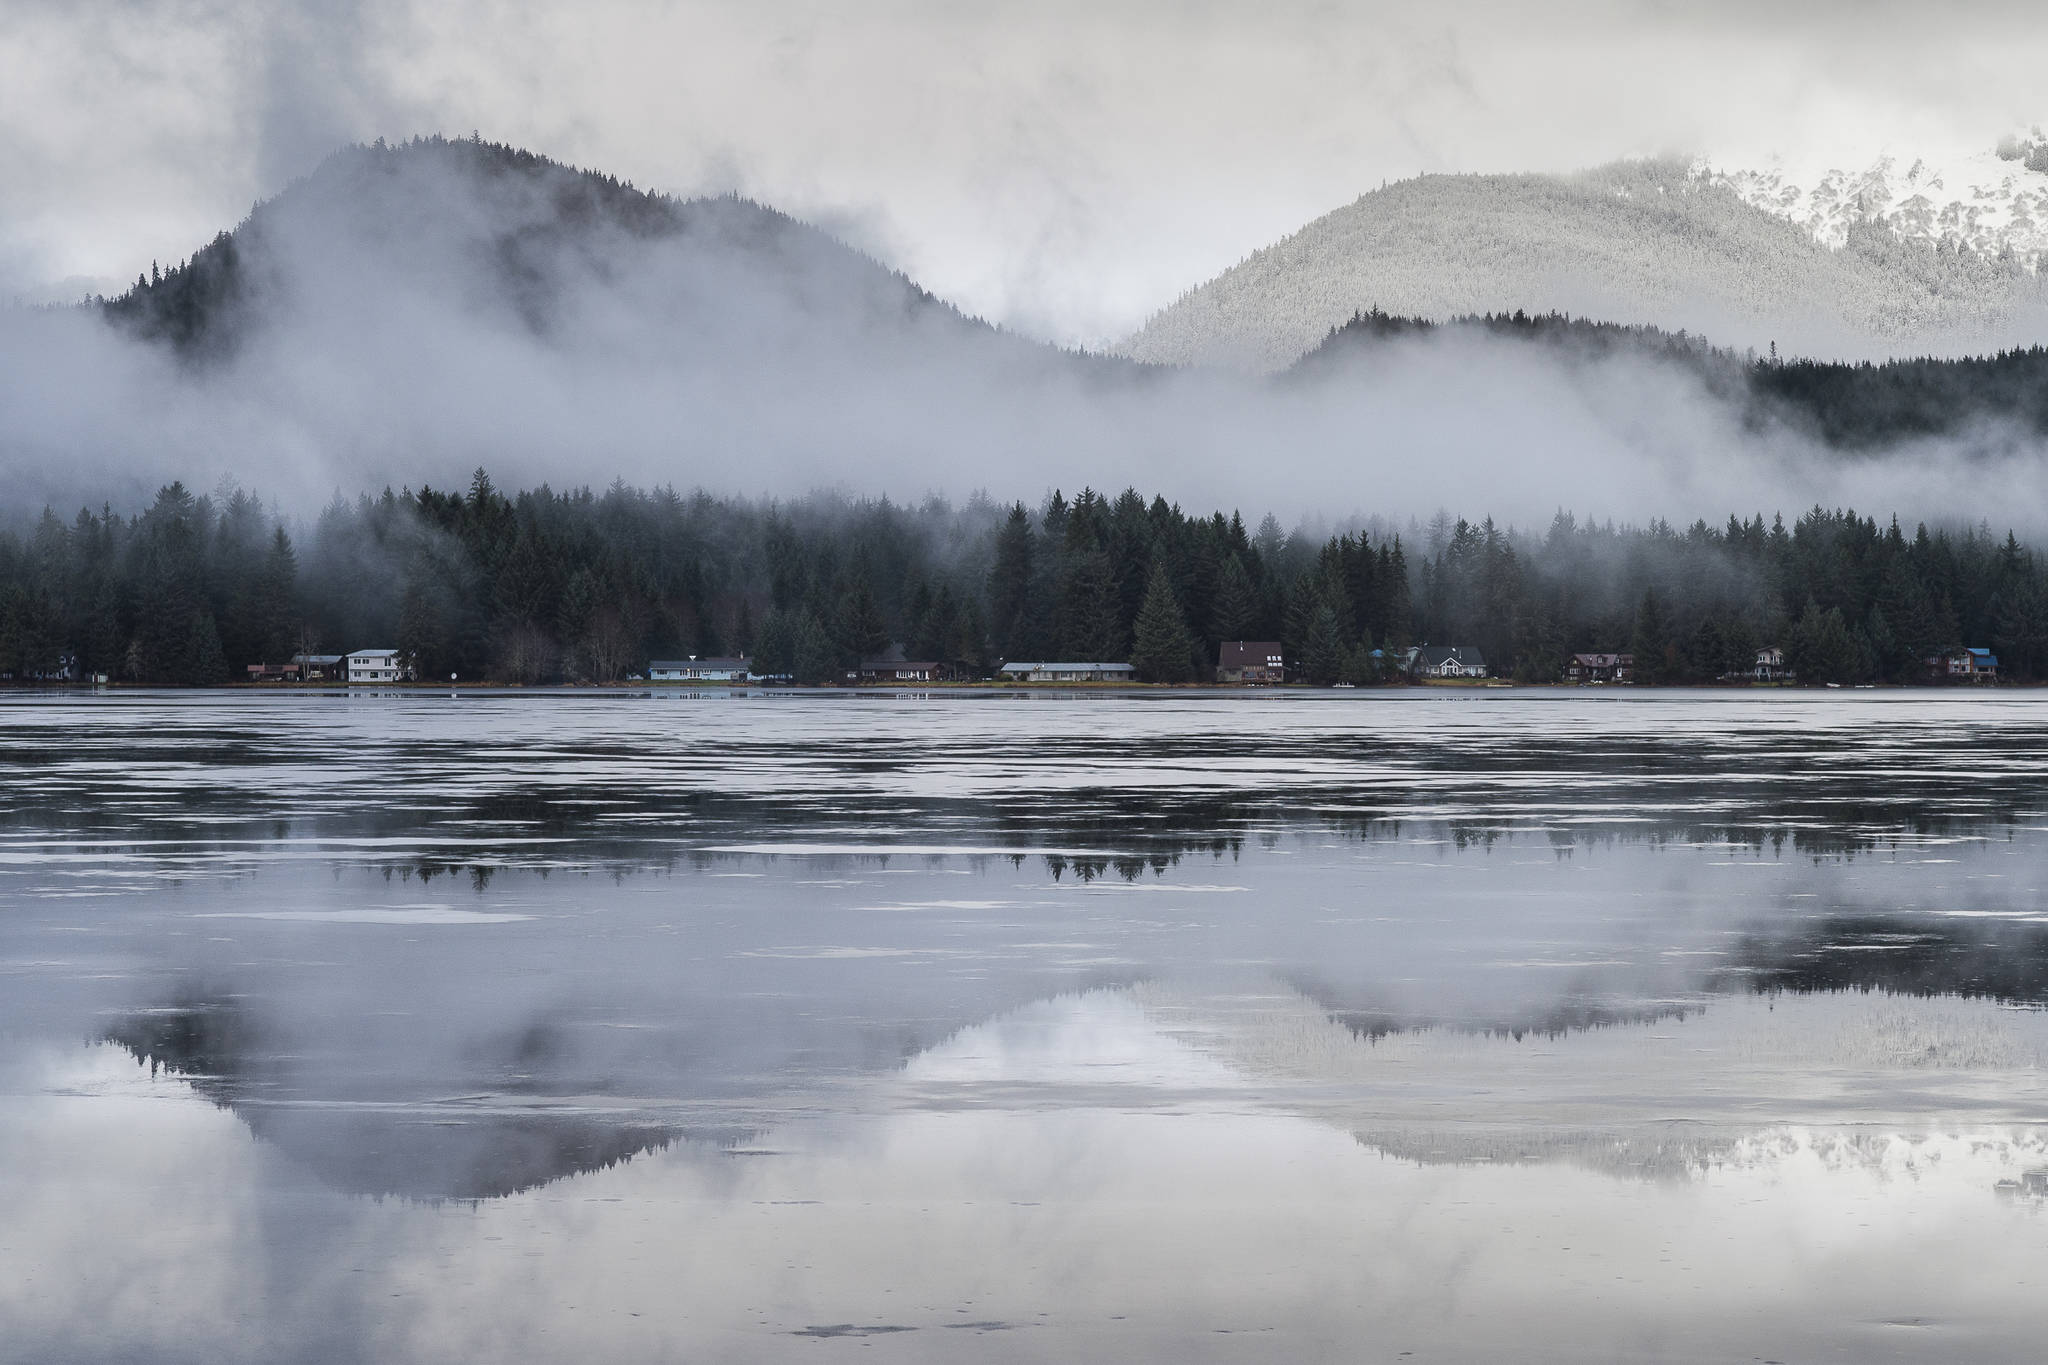 Fresh rainwater sits on top of the ice at Auke Lake on Wednesday, Jan. 2, 2019. The National Weather Service calls for decreasing clouds and a high of 35 for Thursday. (Michael Penn | Juneau Empire)